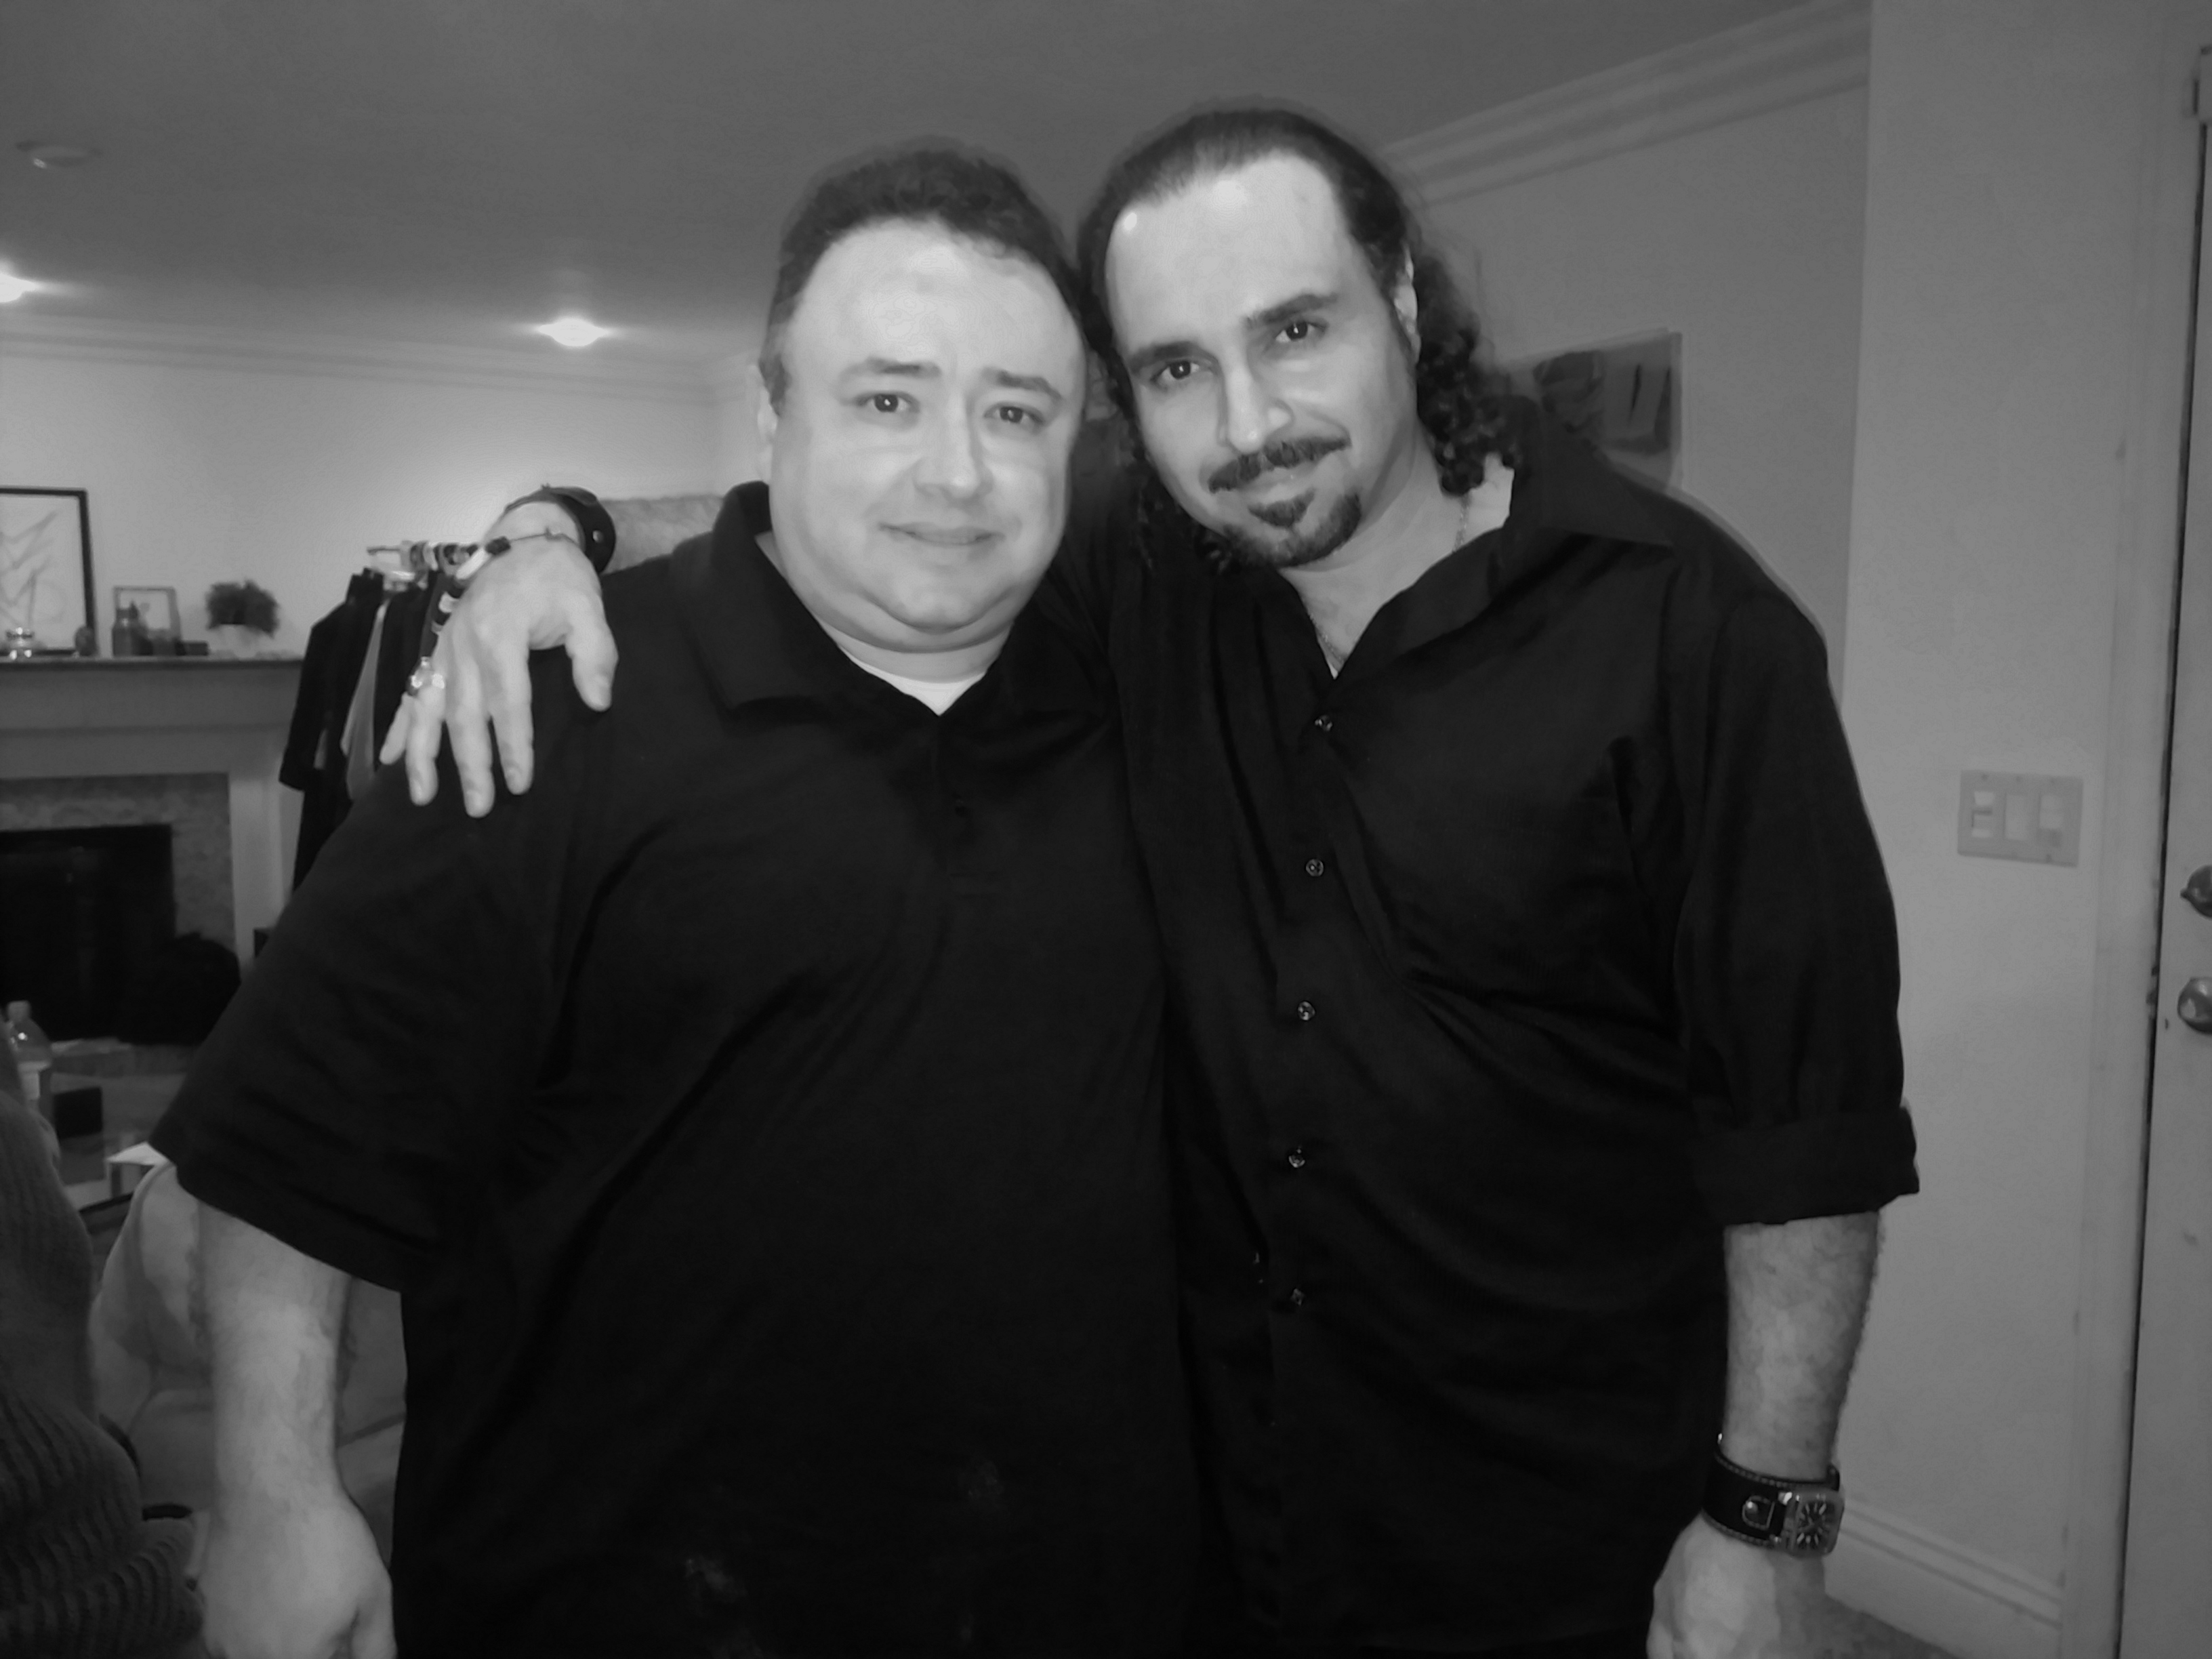 Sam Osman (right) and Executive Producer Gabriel Campisi (left) on the Set of 